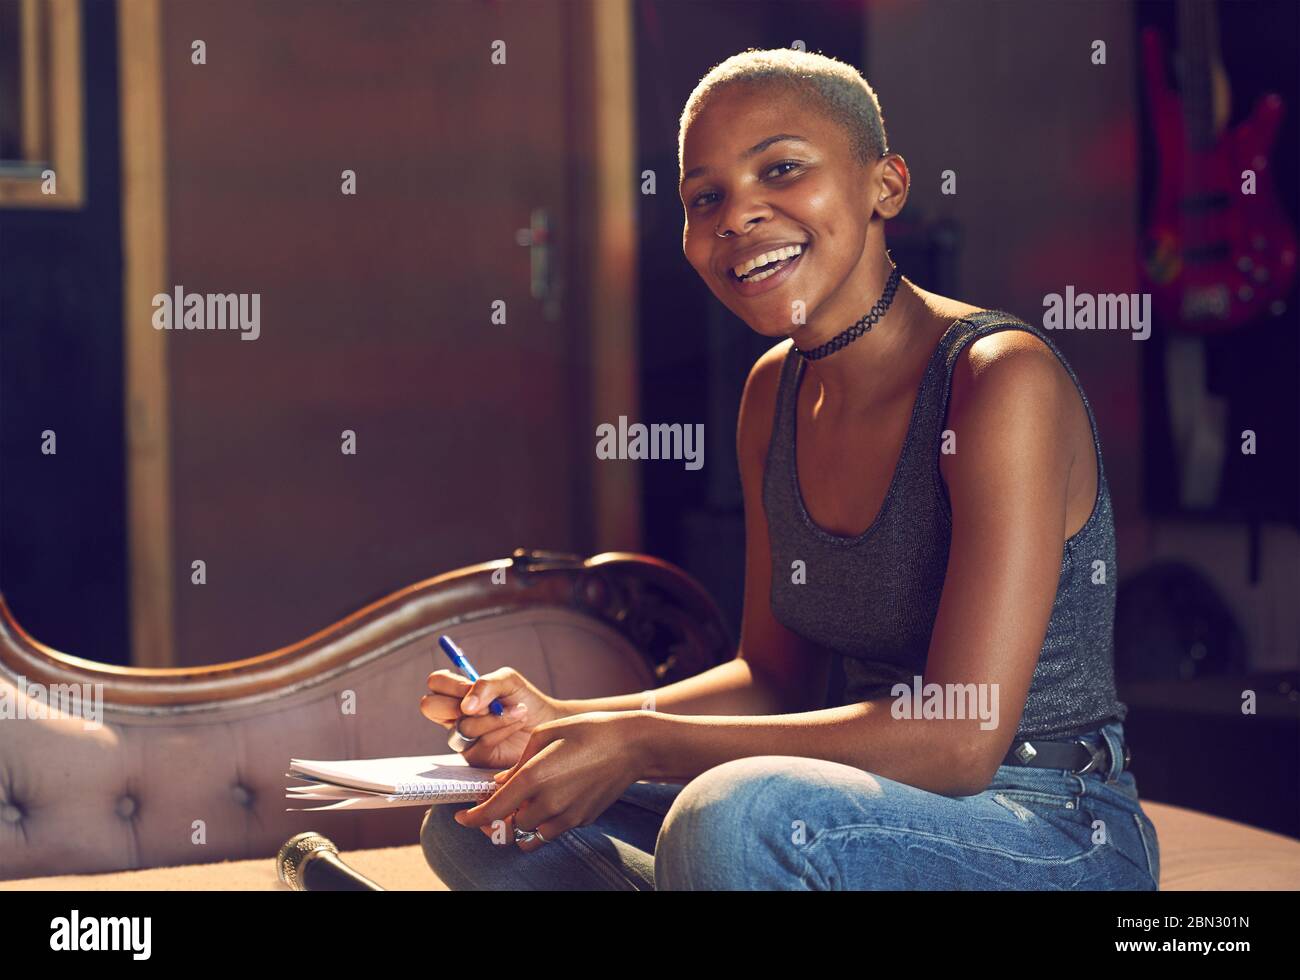 Portrait confident female musician song writing Stock Photo